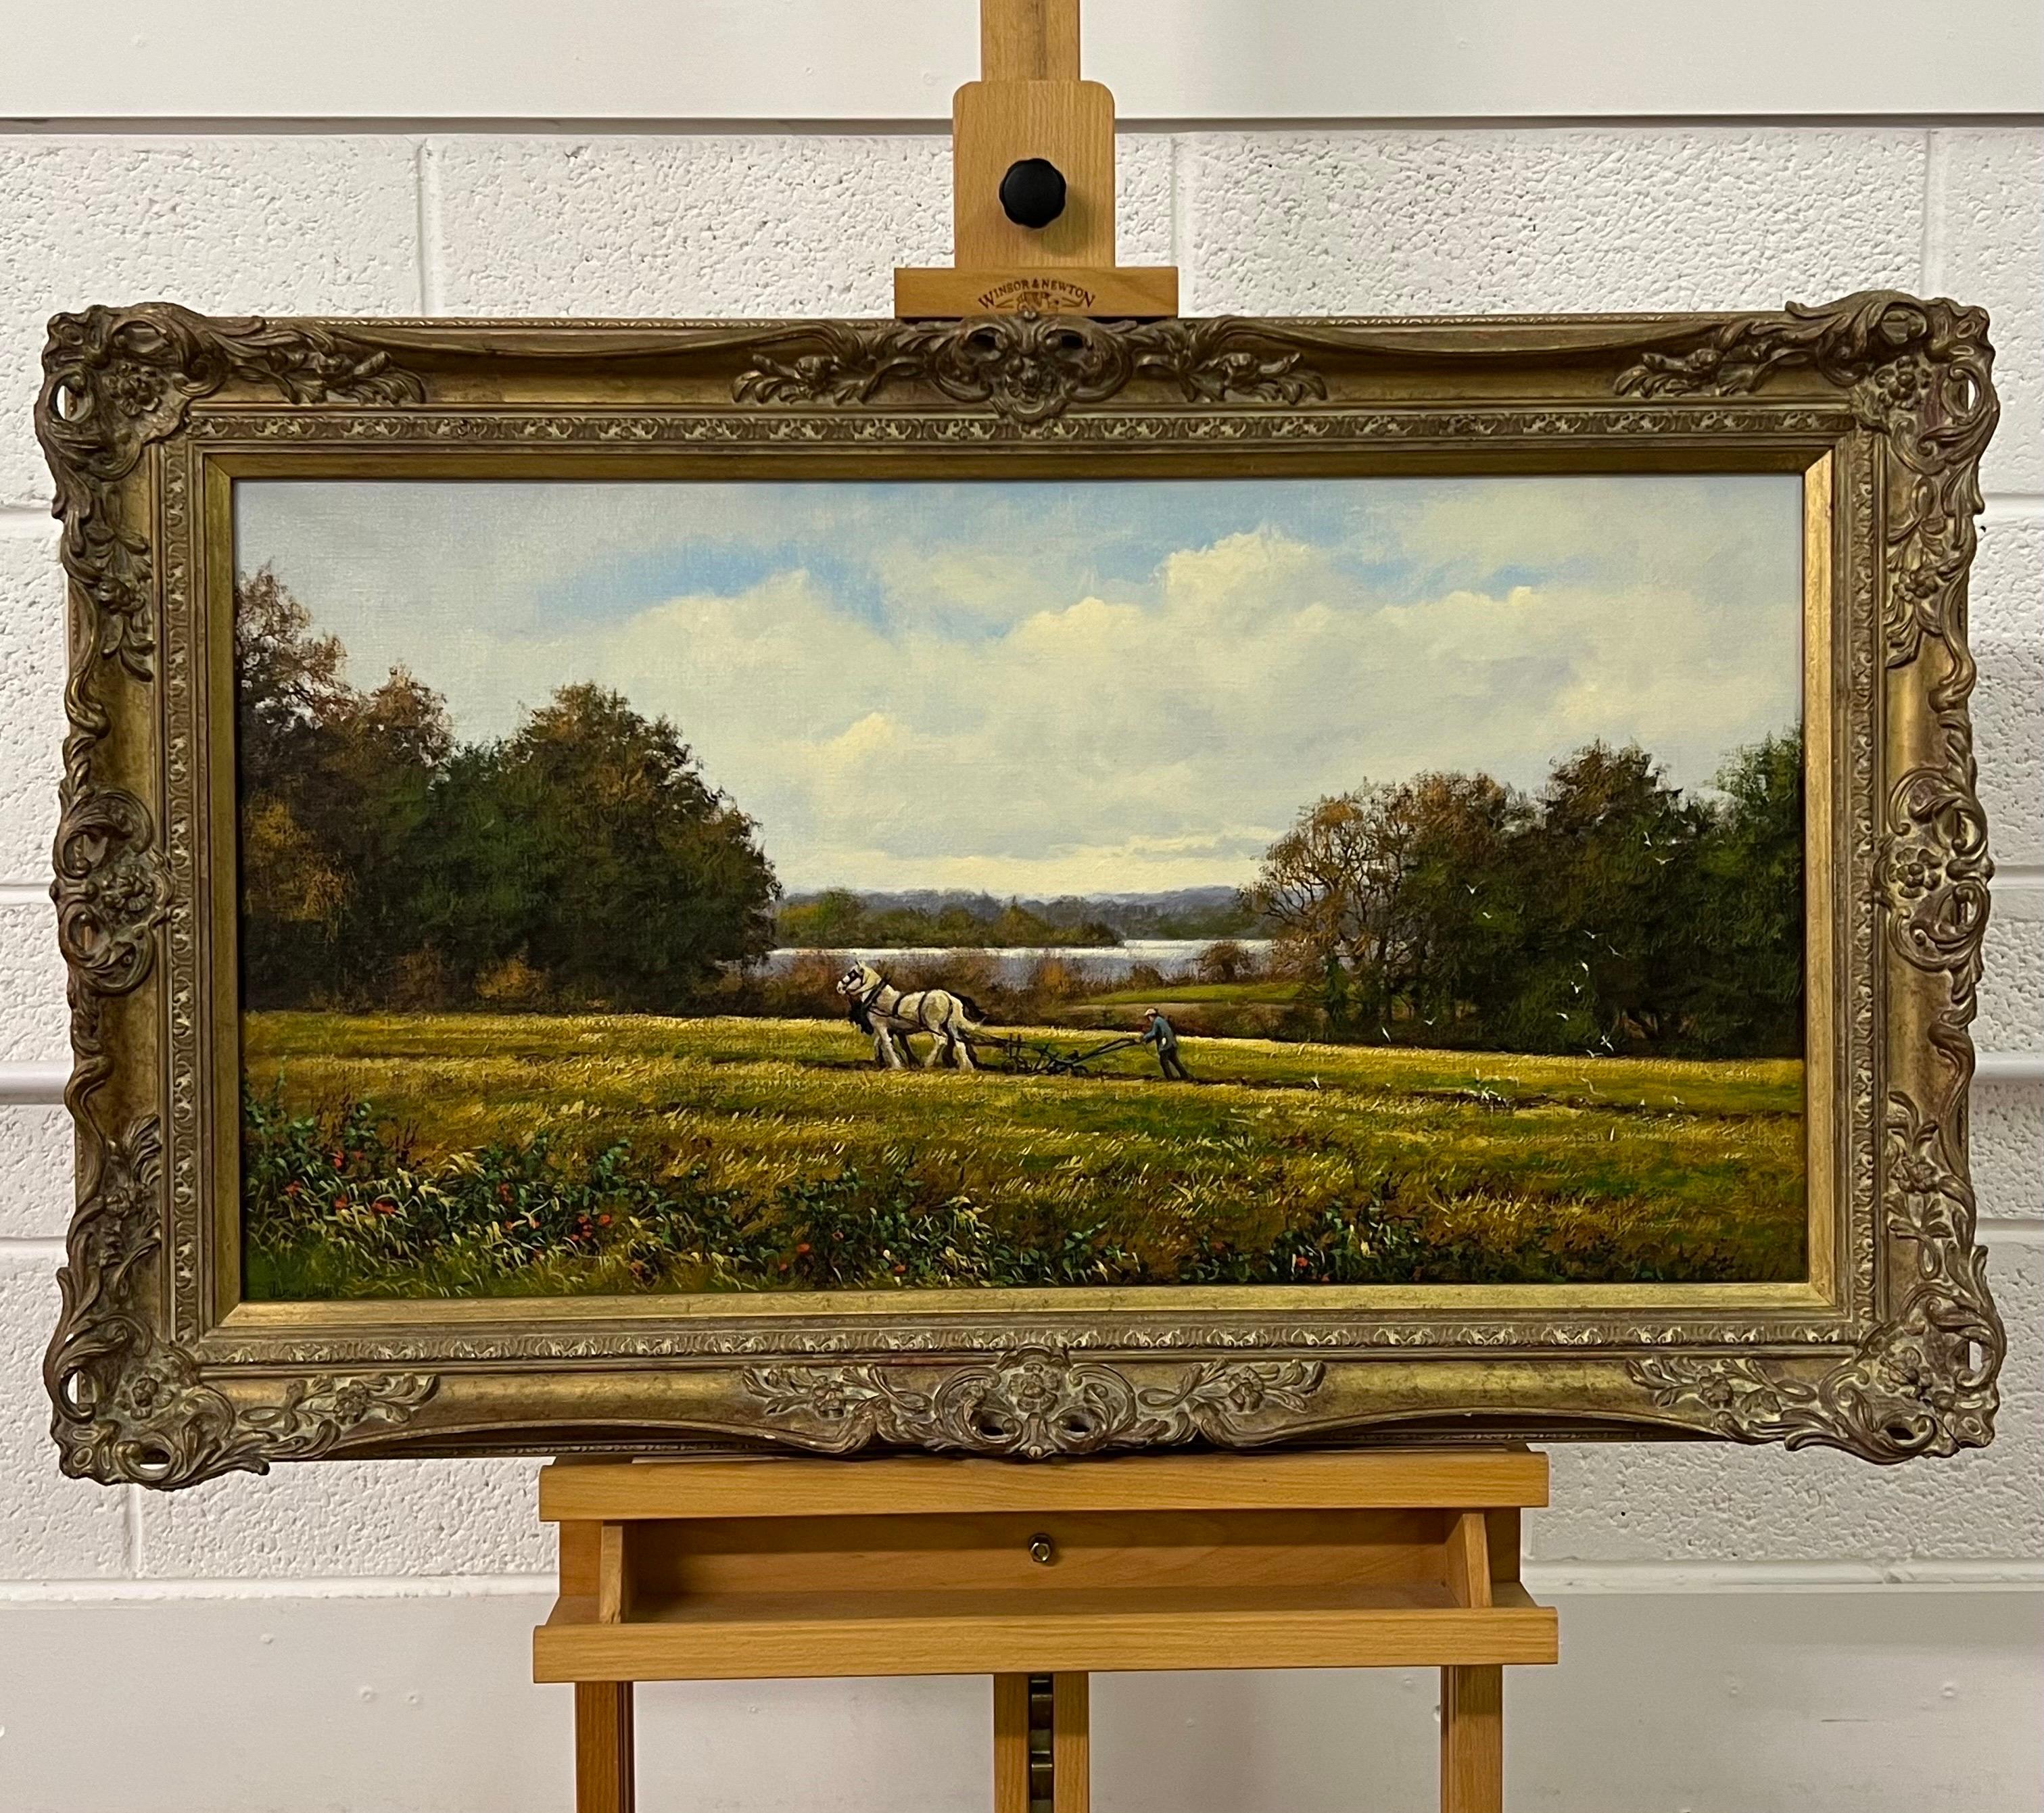 Traditional Oil Painting of the English Countryside with Horses & Ploughman by 20th Century Modern British Artist, James Wright. 

Art measures 30 x 16 inches
Frame measures 36 x 22 inches 

Presented in a beautiful ornate frame, this vintage